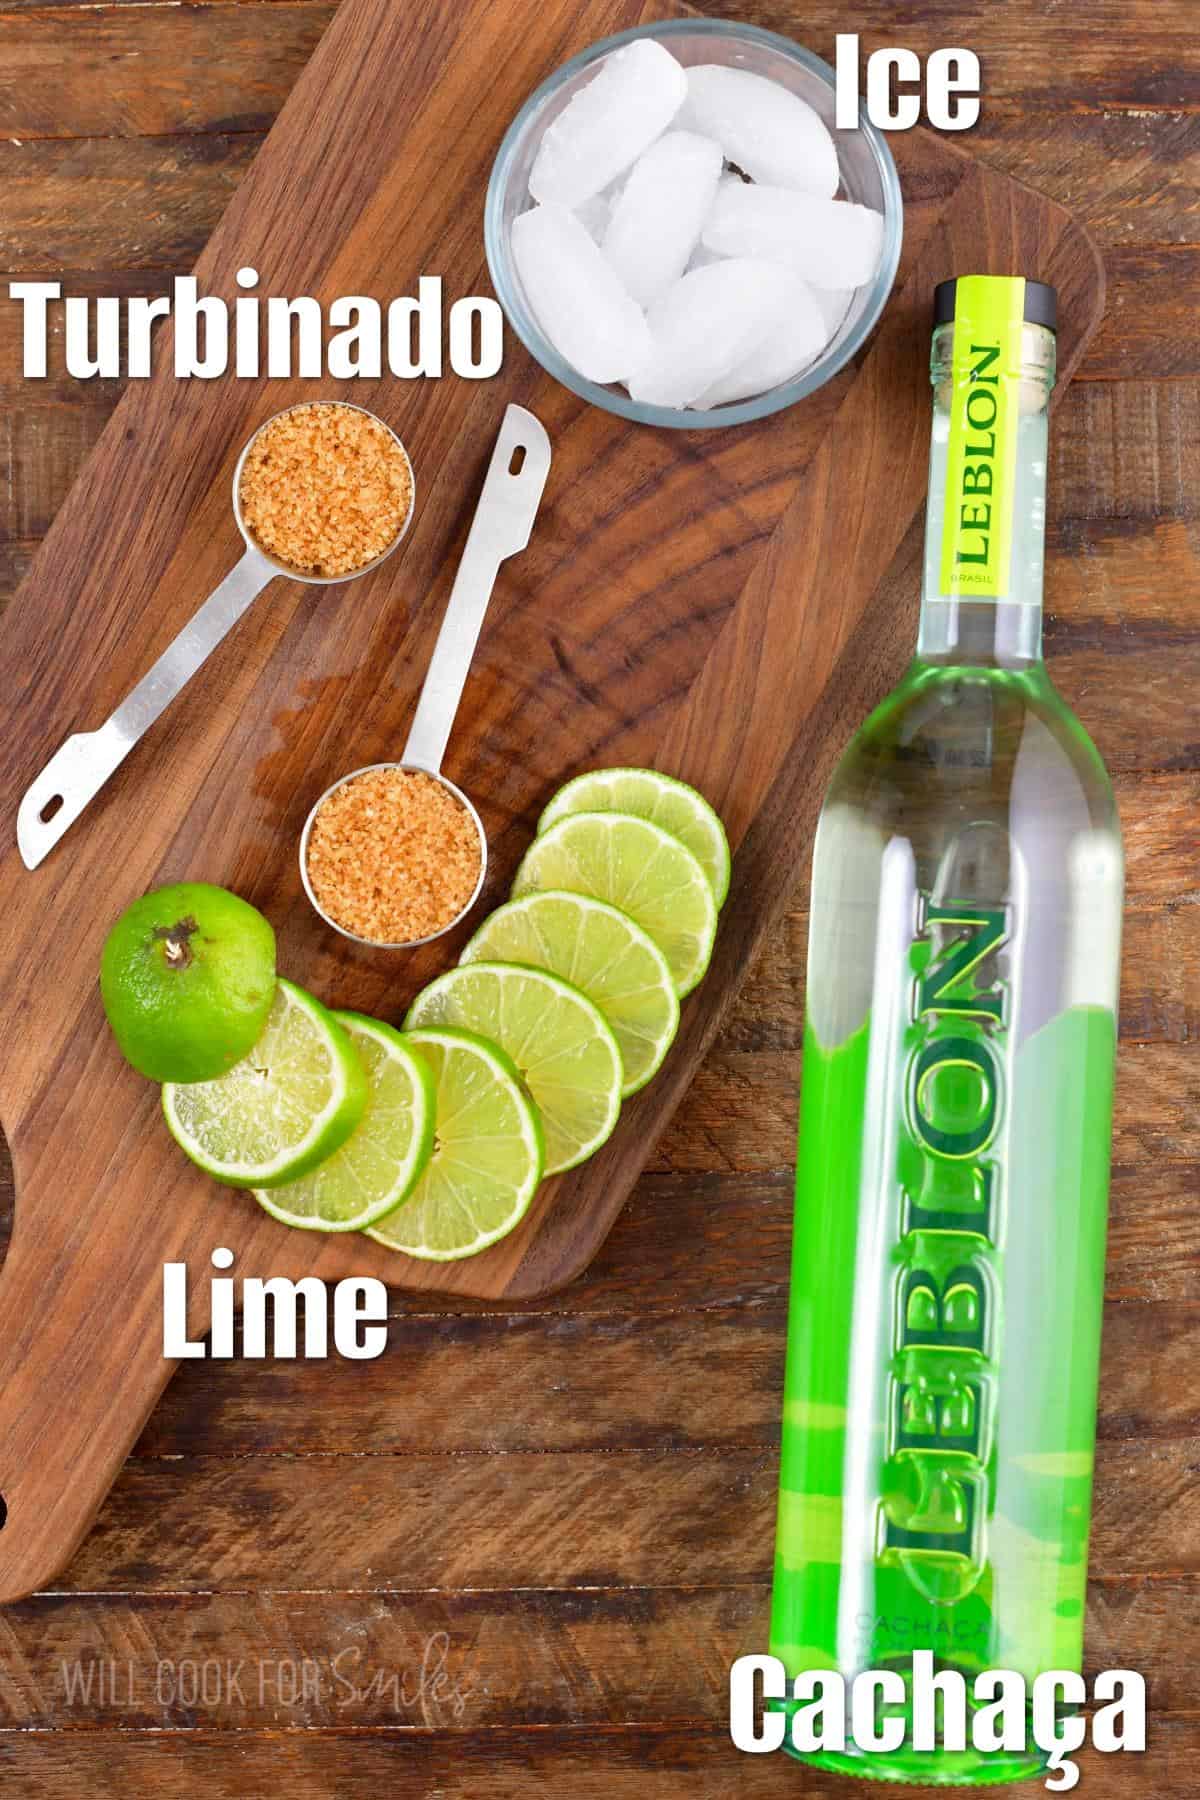 The ingredients for Caipirinha labeled and placed on a wooden surface.